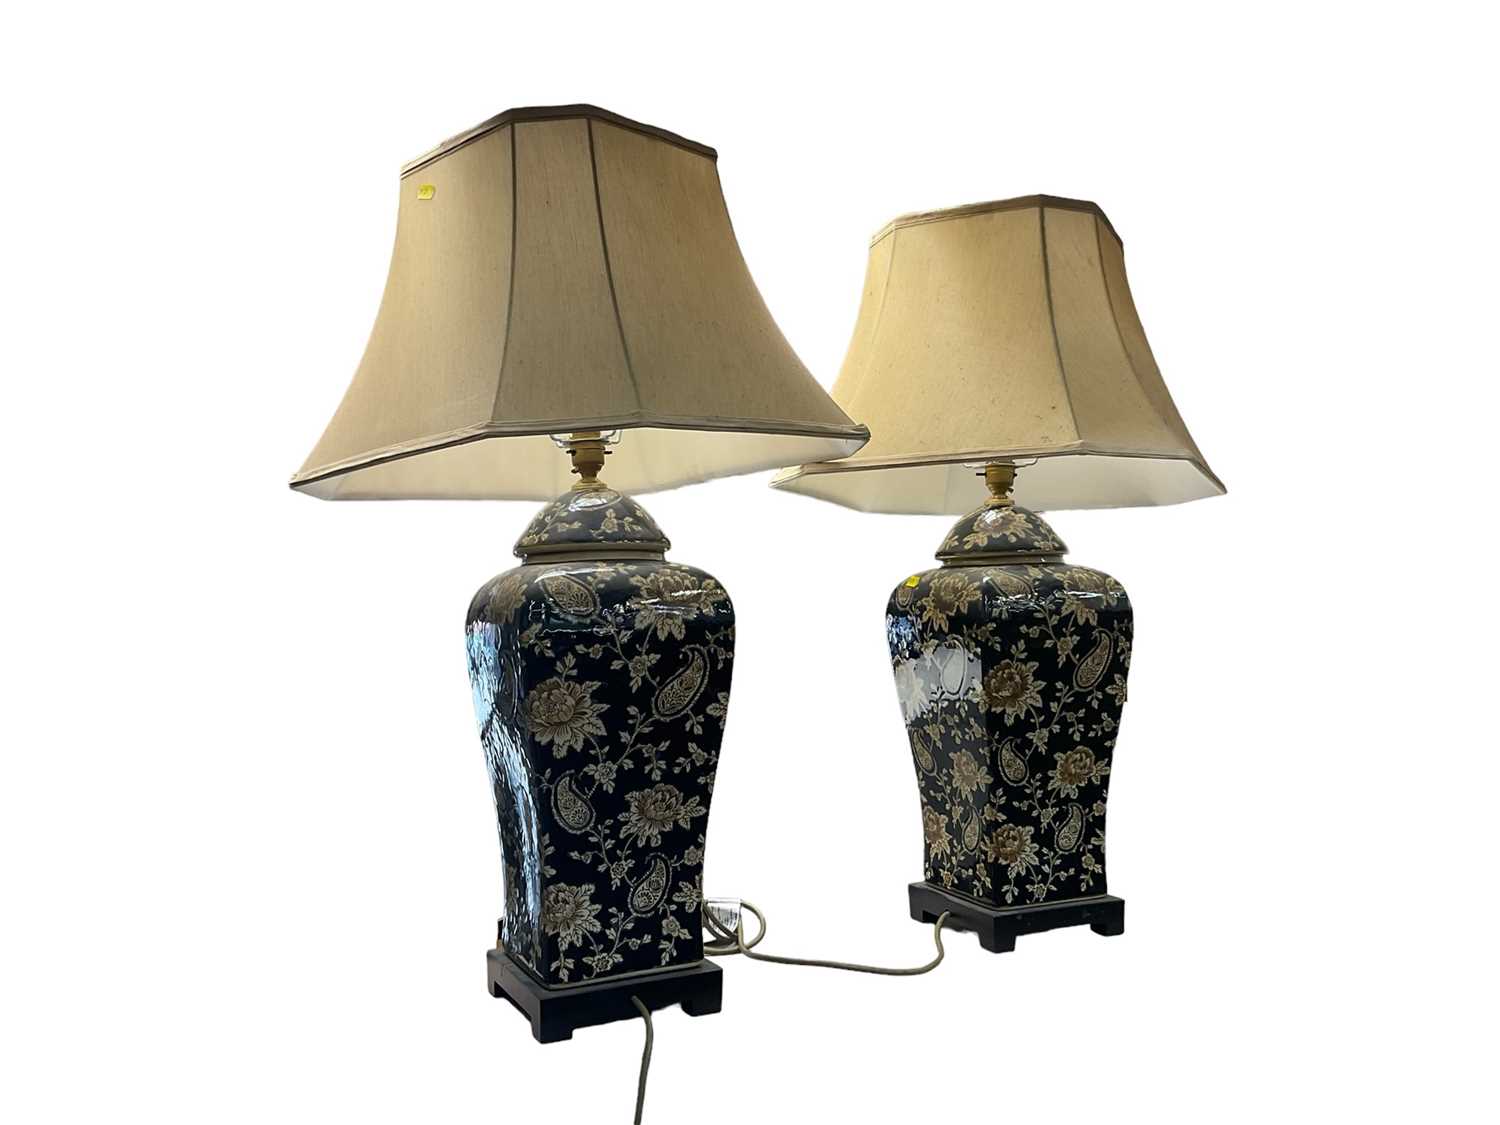 Pair of table lamps with shades